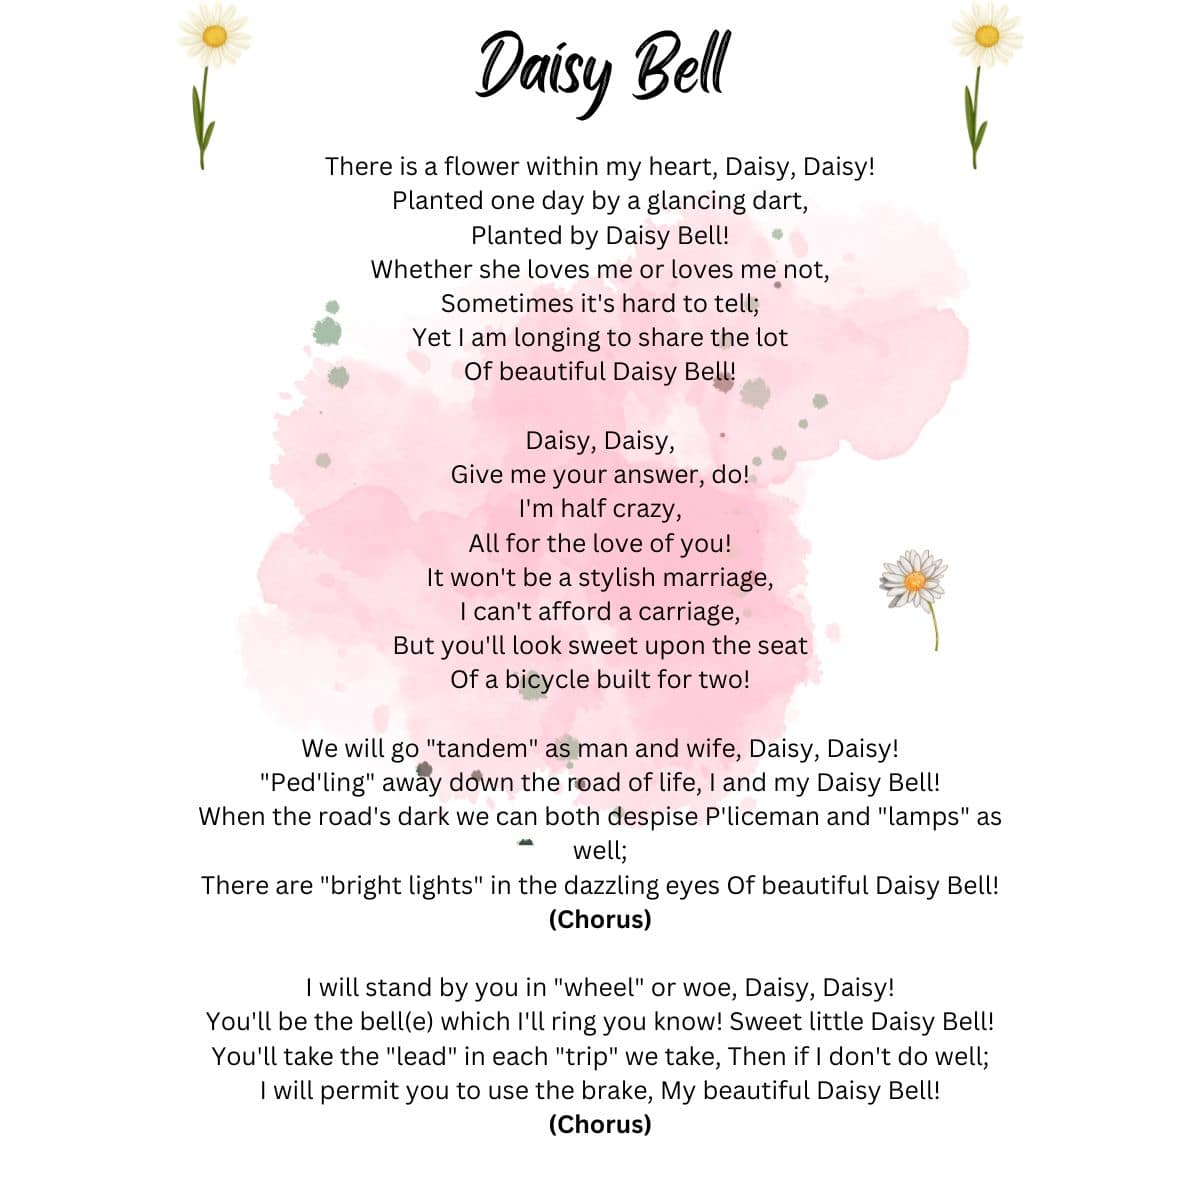 Daisy Bell Lyrics on a White and Pink Background